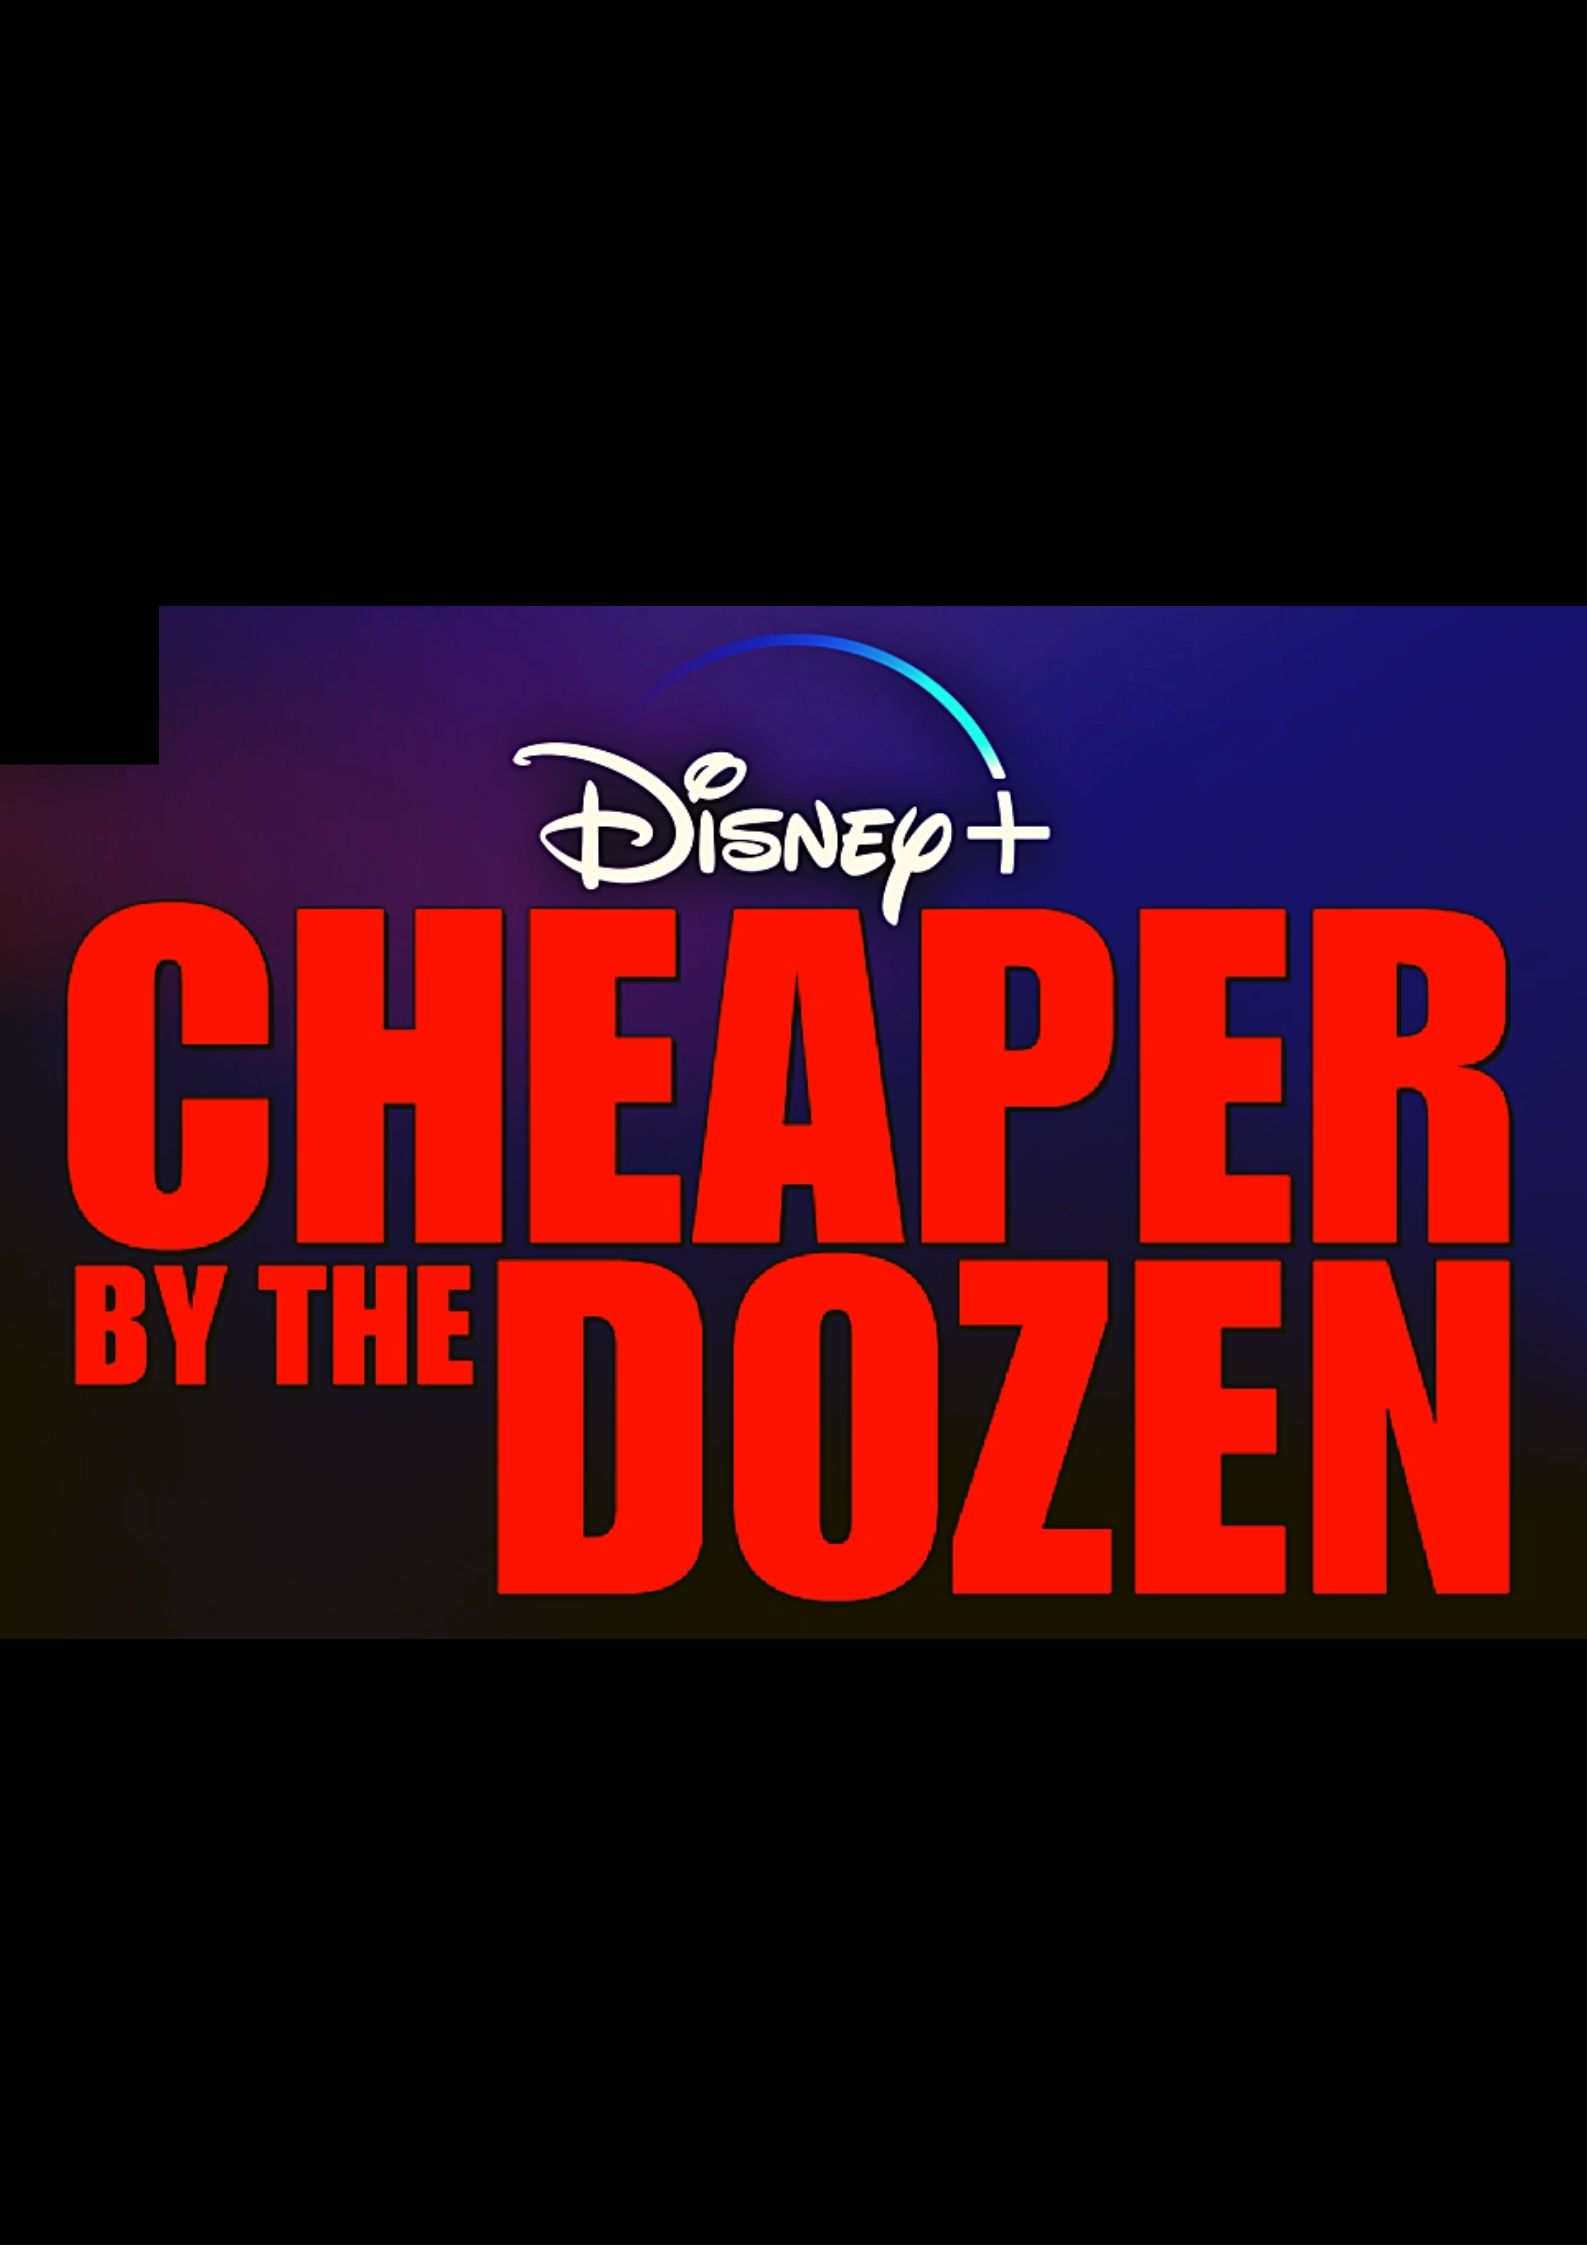 Cheaper by the Dozen parents guide and age rating | 2022